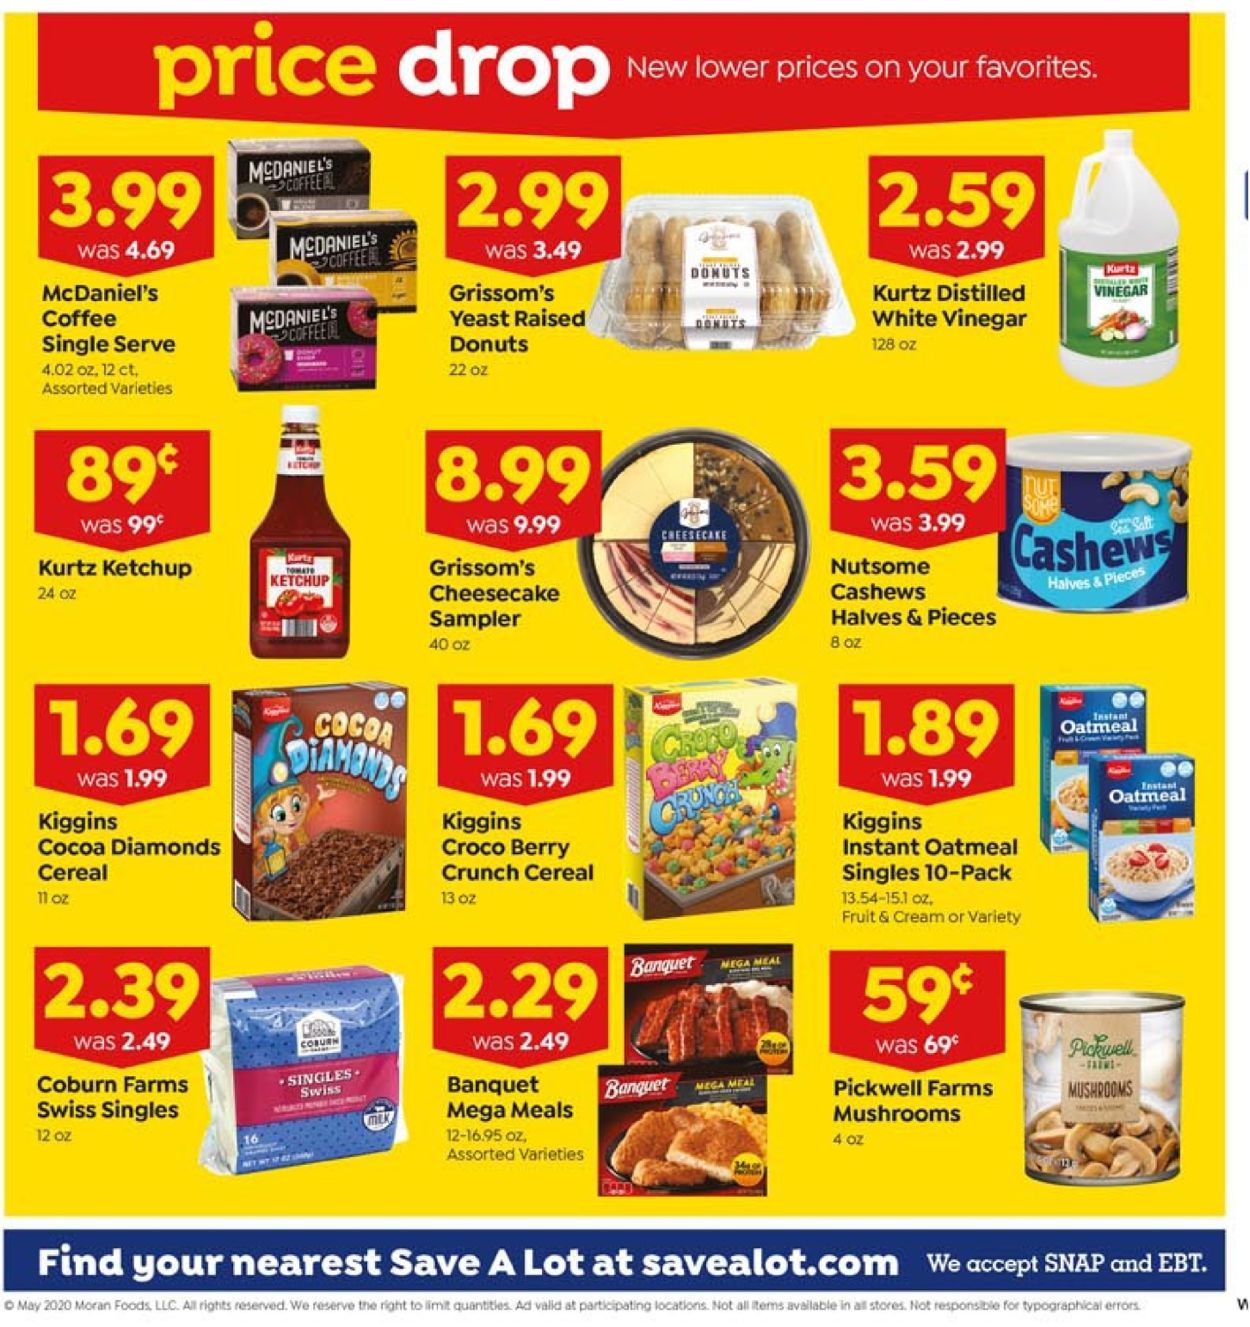 Save a Lot Current weekly ad 04/29 05/05/2020 [3]